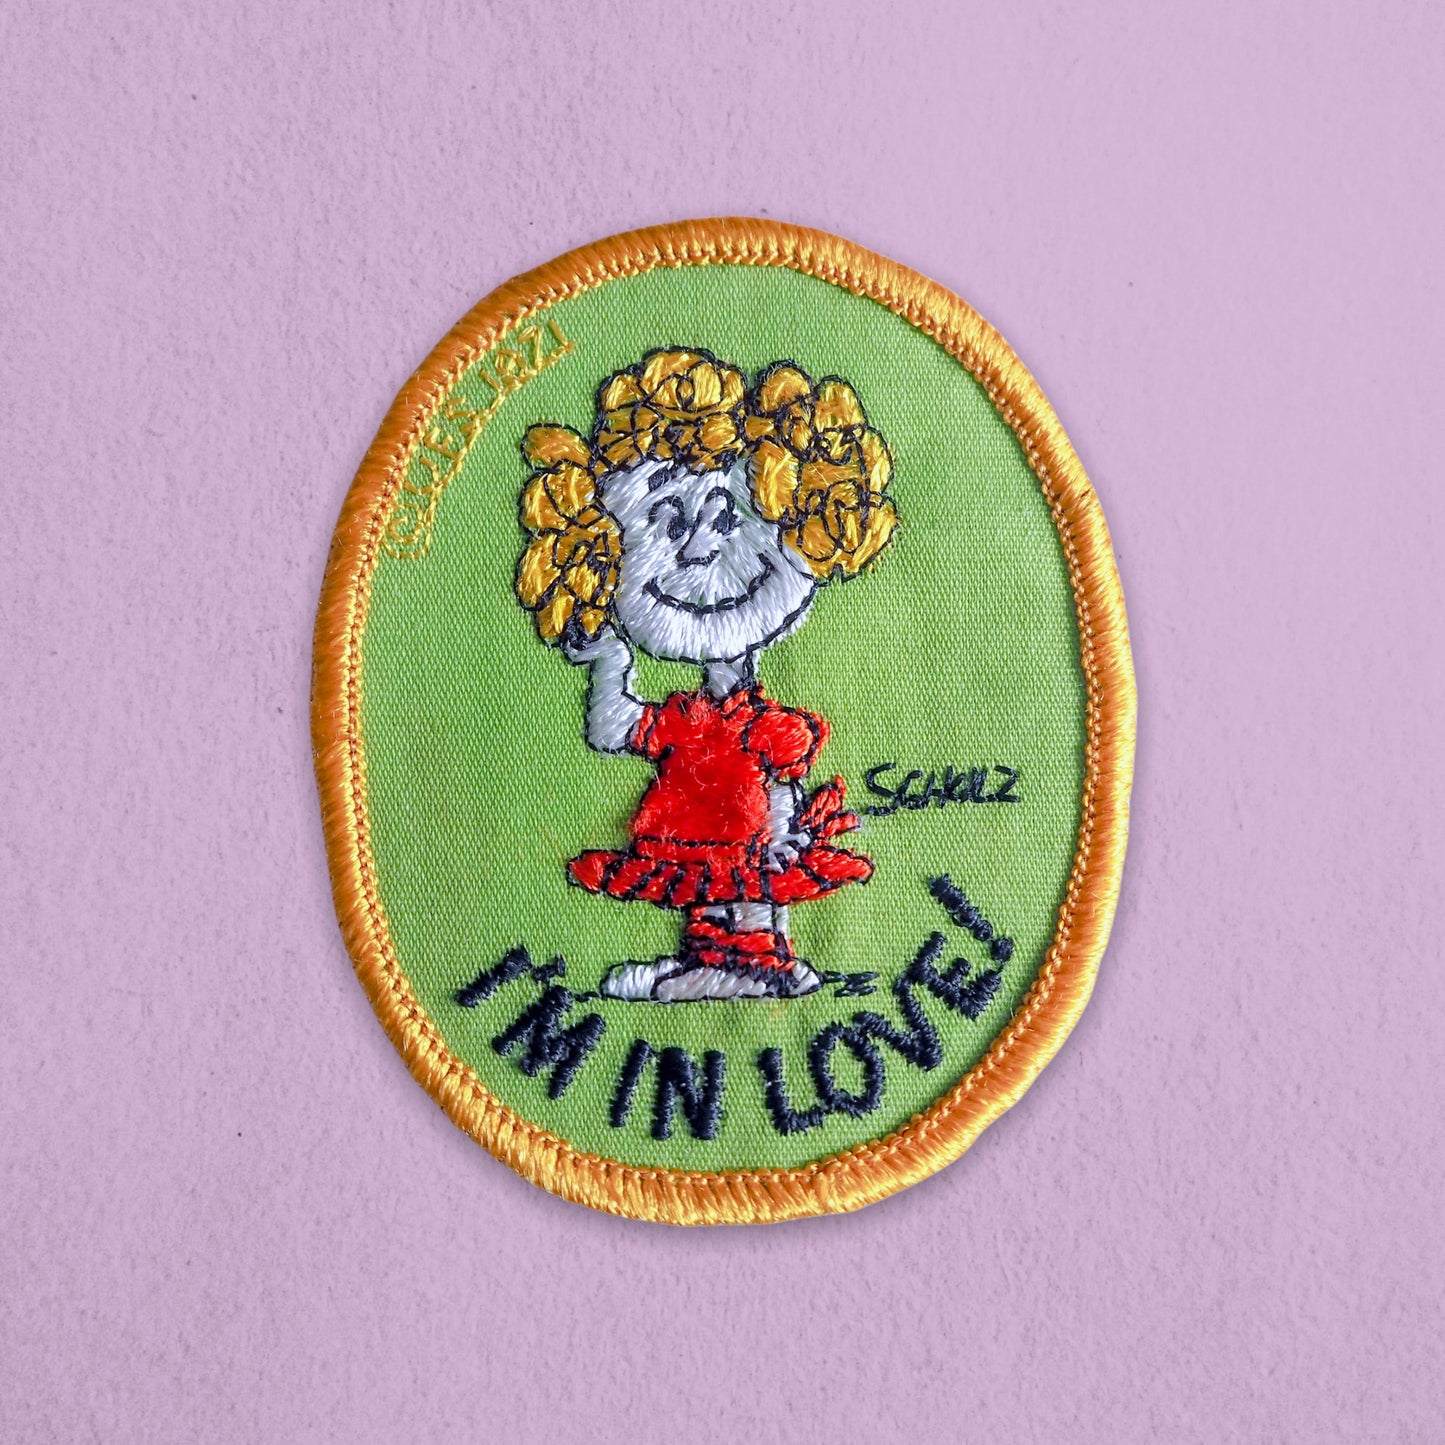 Vintage 1971 Peanuts ‘I’m in Love!’ Patch